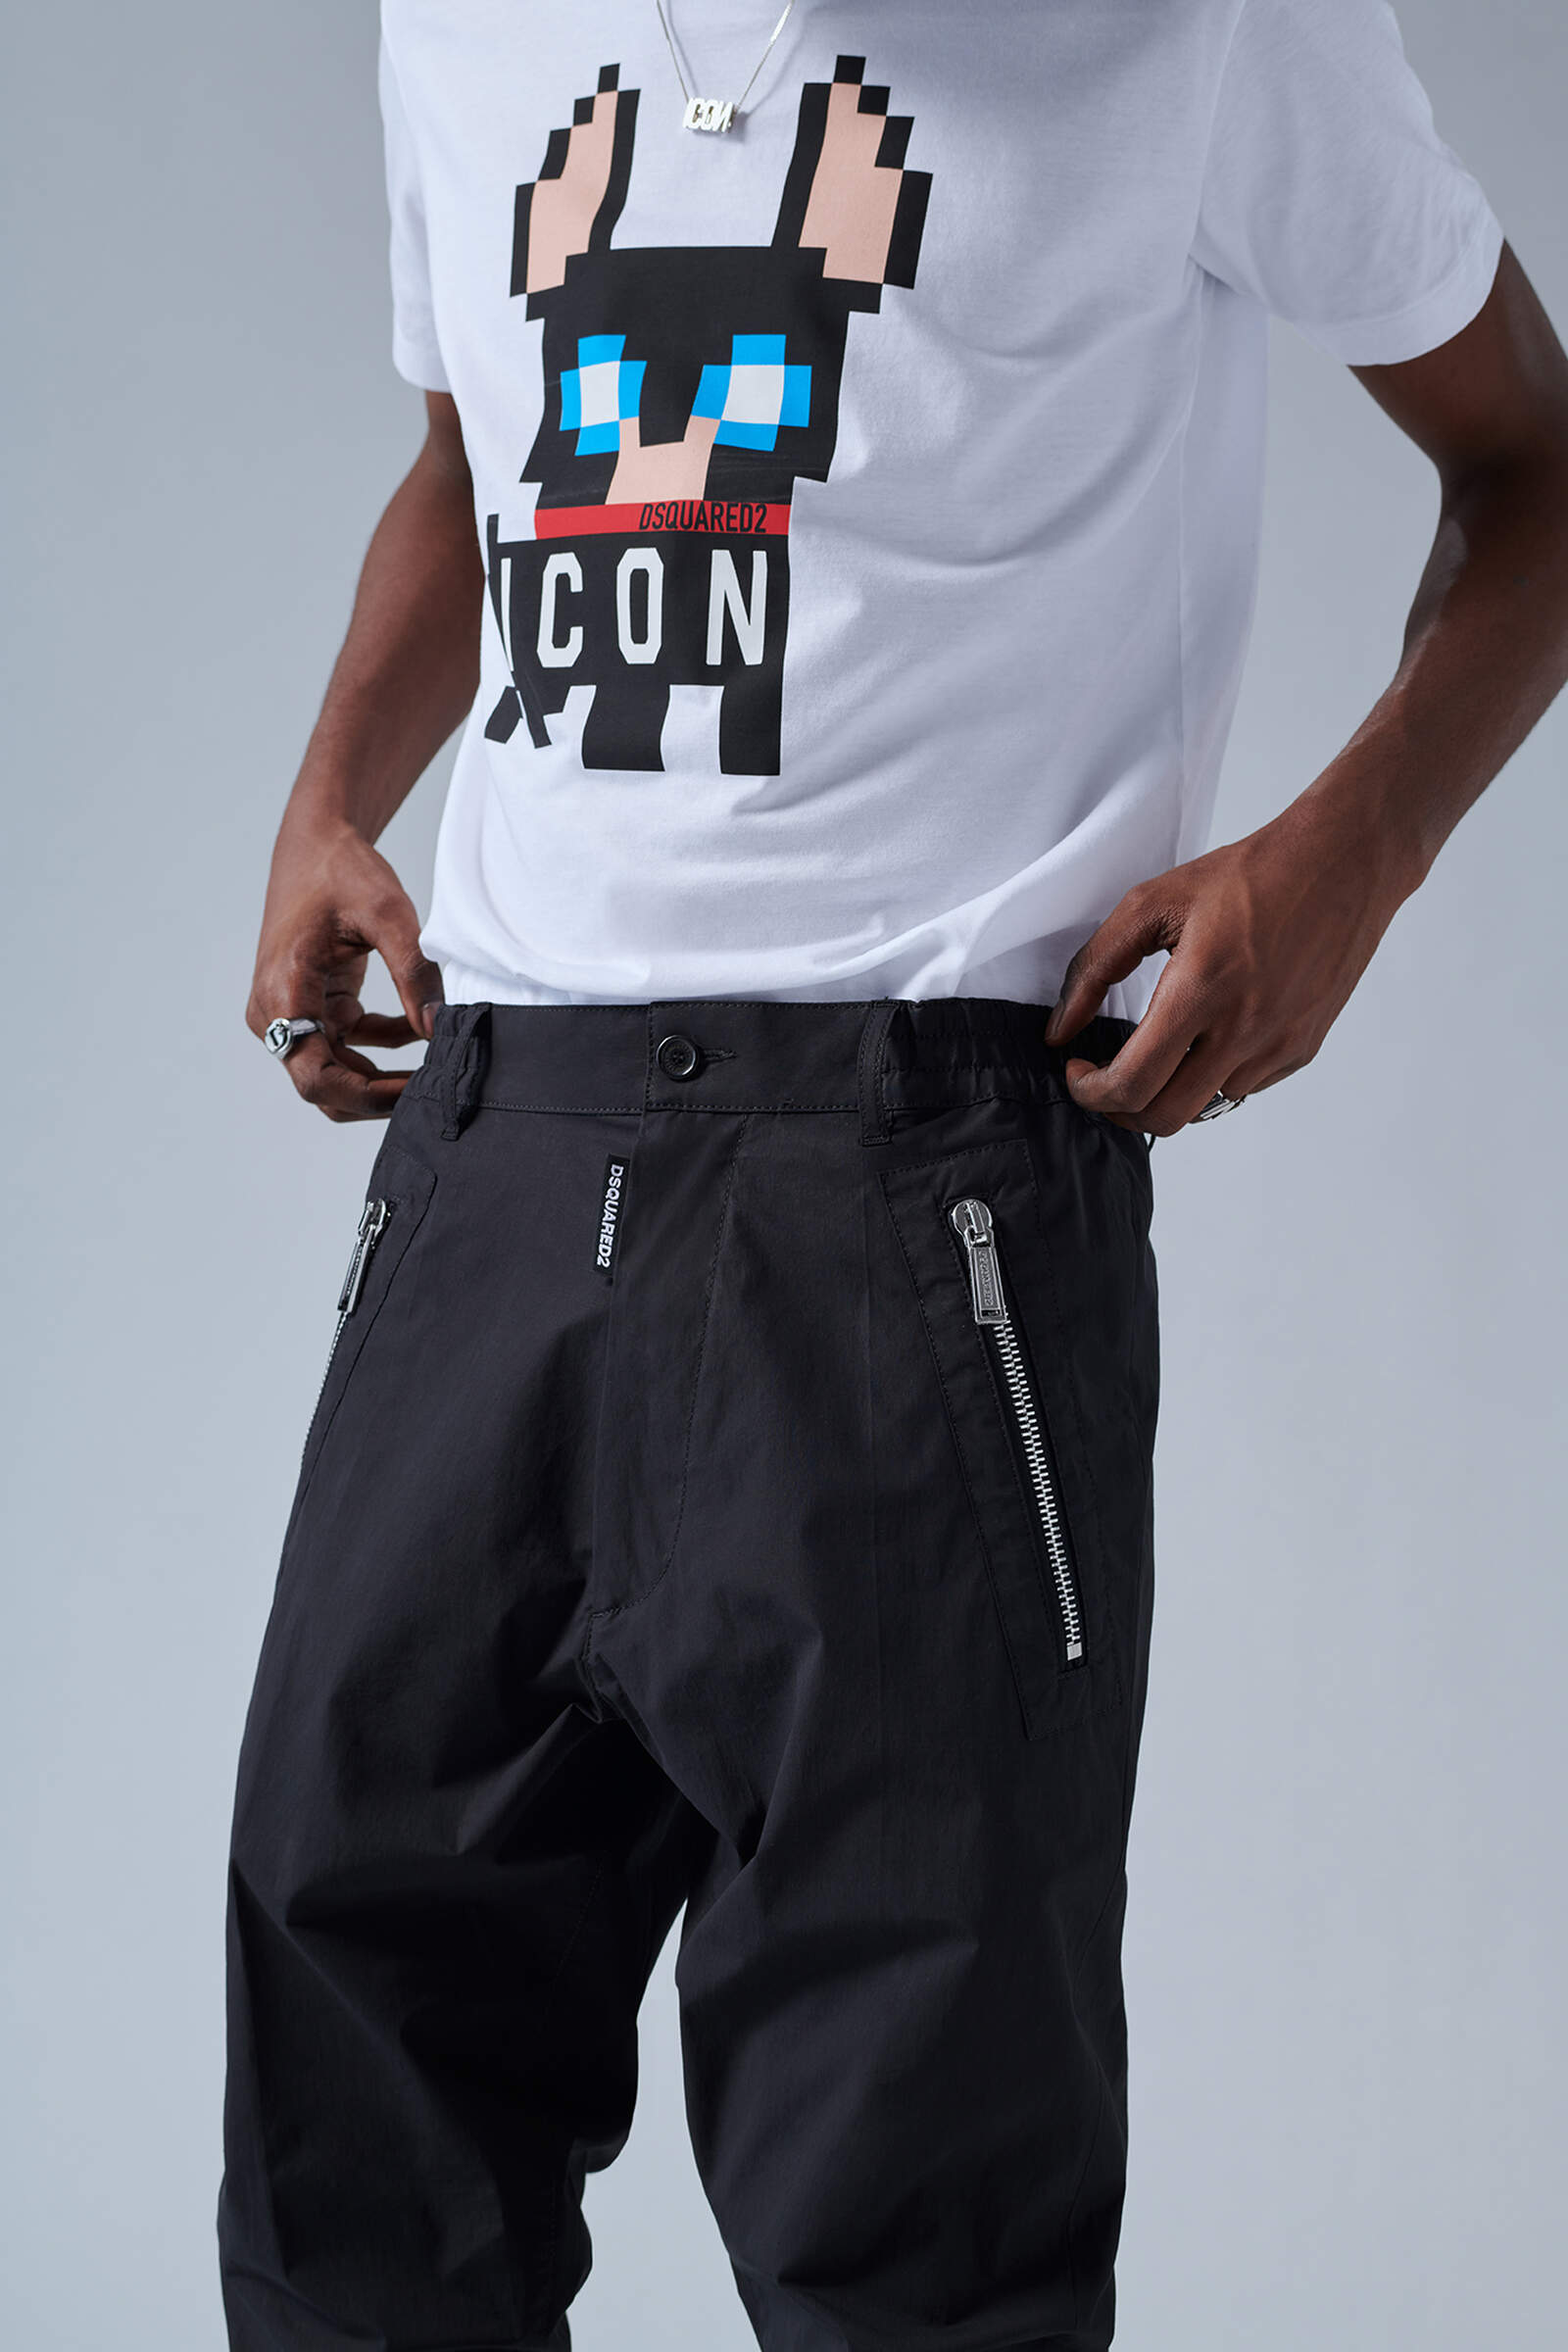 DSQUARED2 Icon Jogging Pant in Black